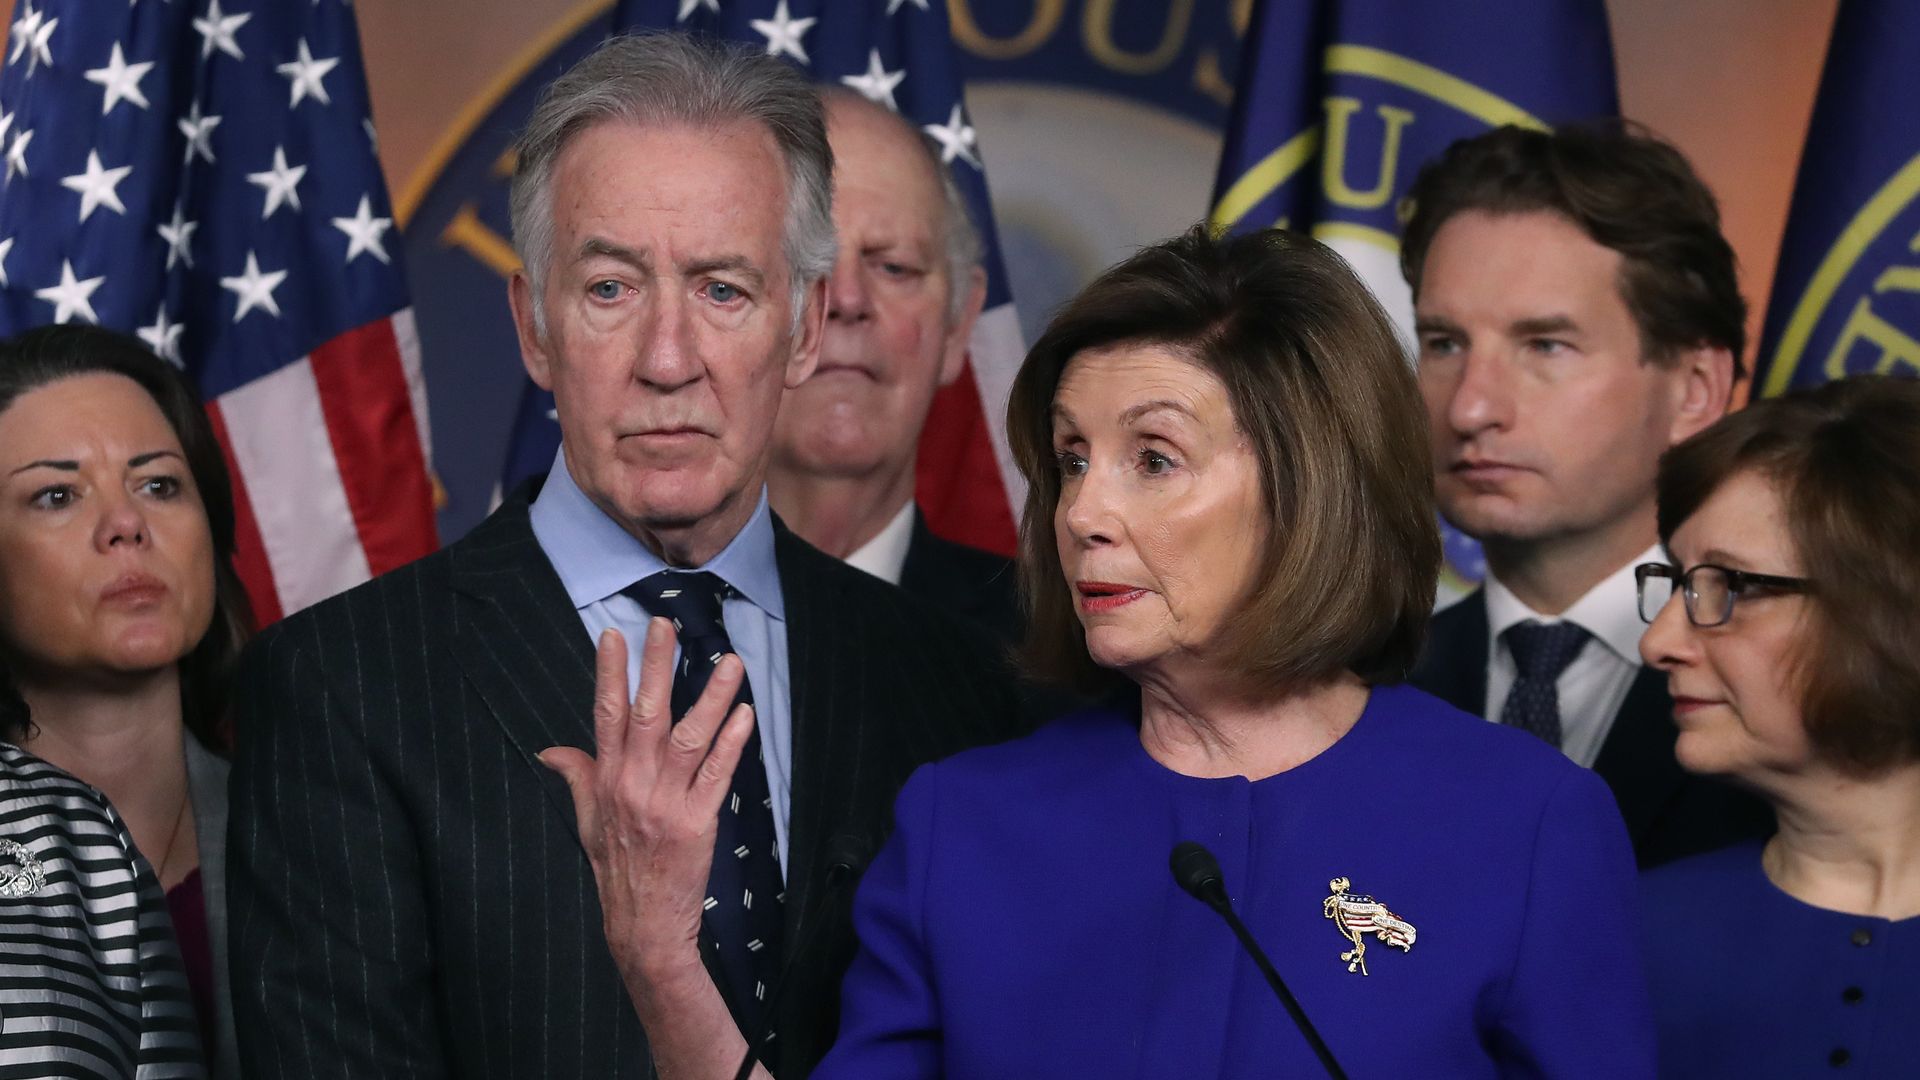 Nancy Pelosi and a group of Democrats at a press conference